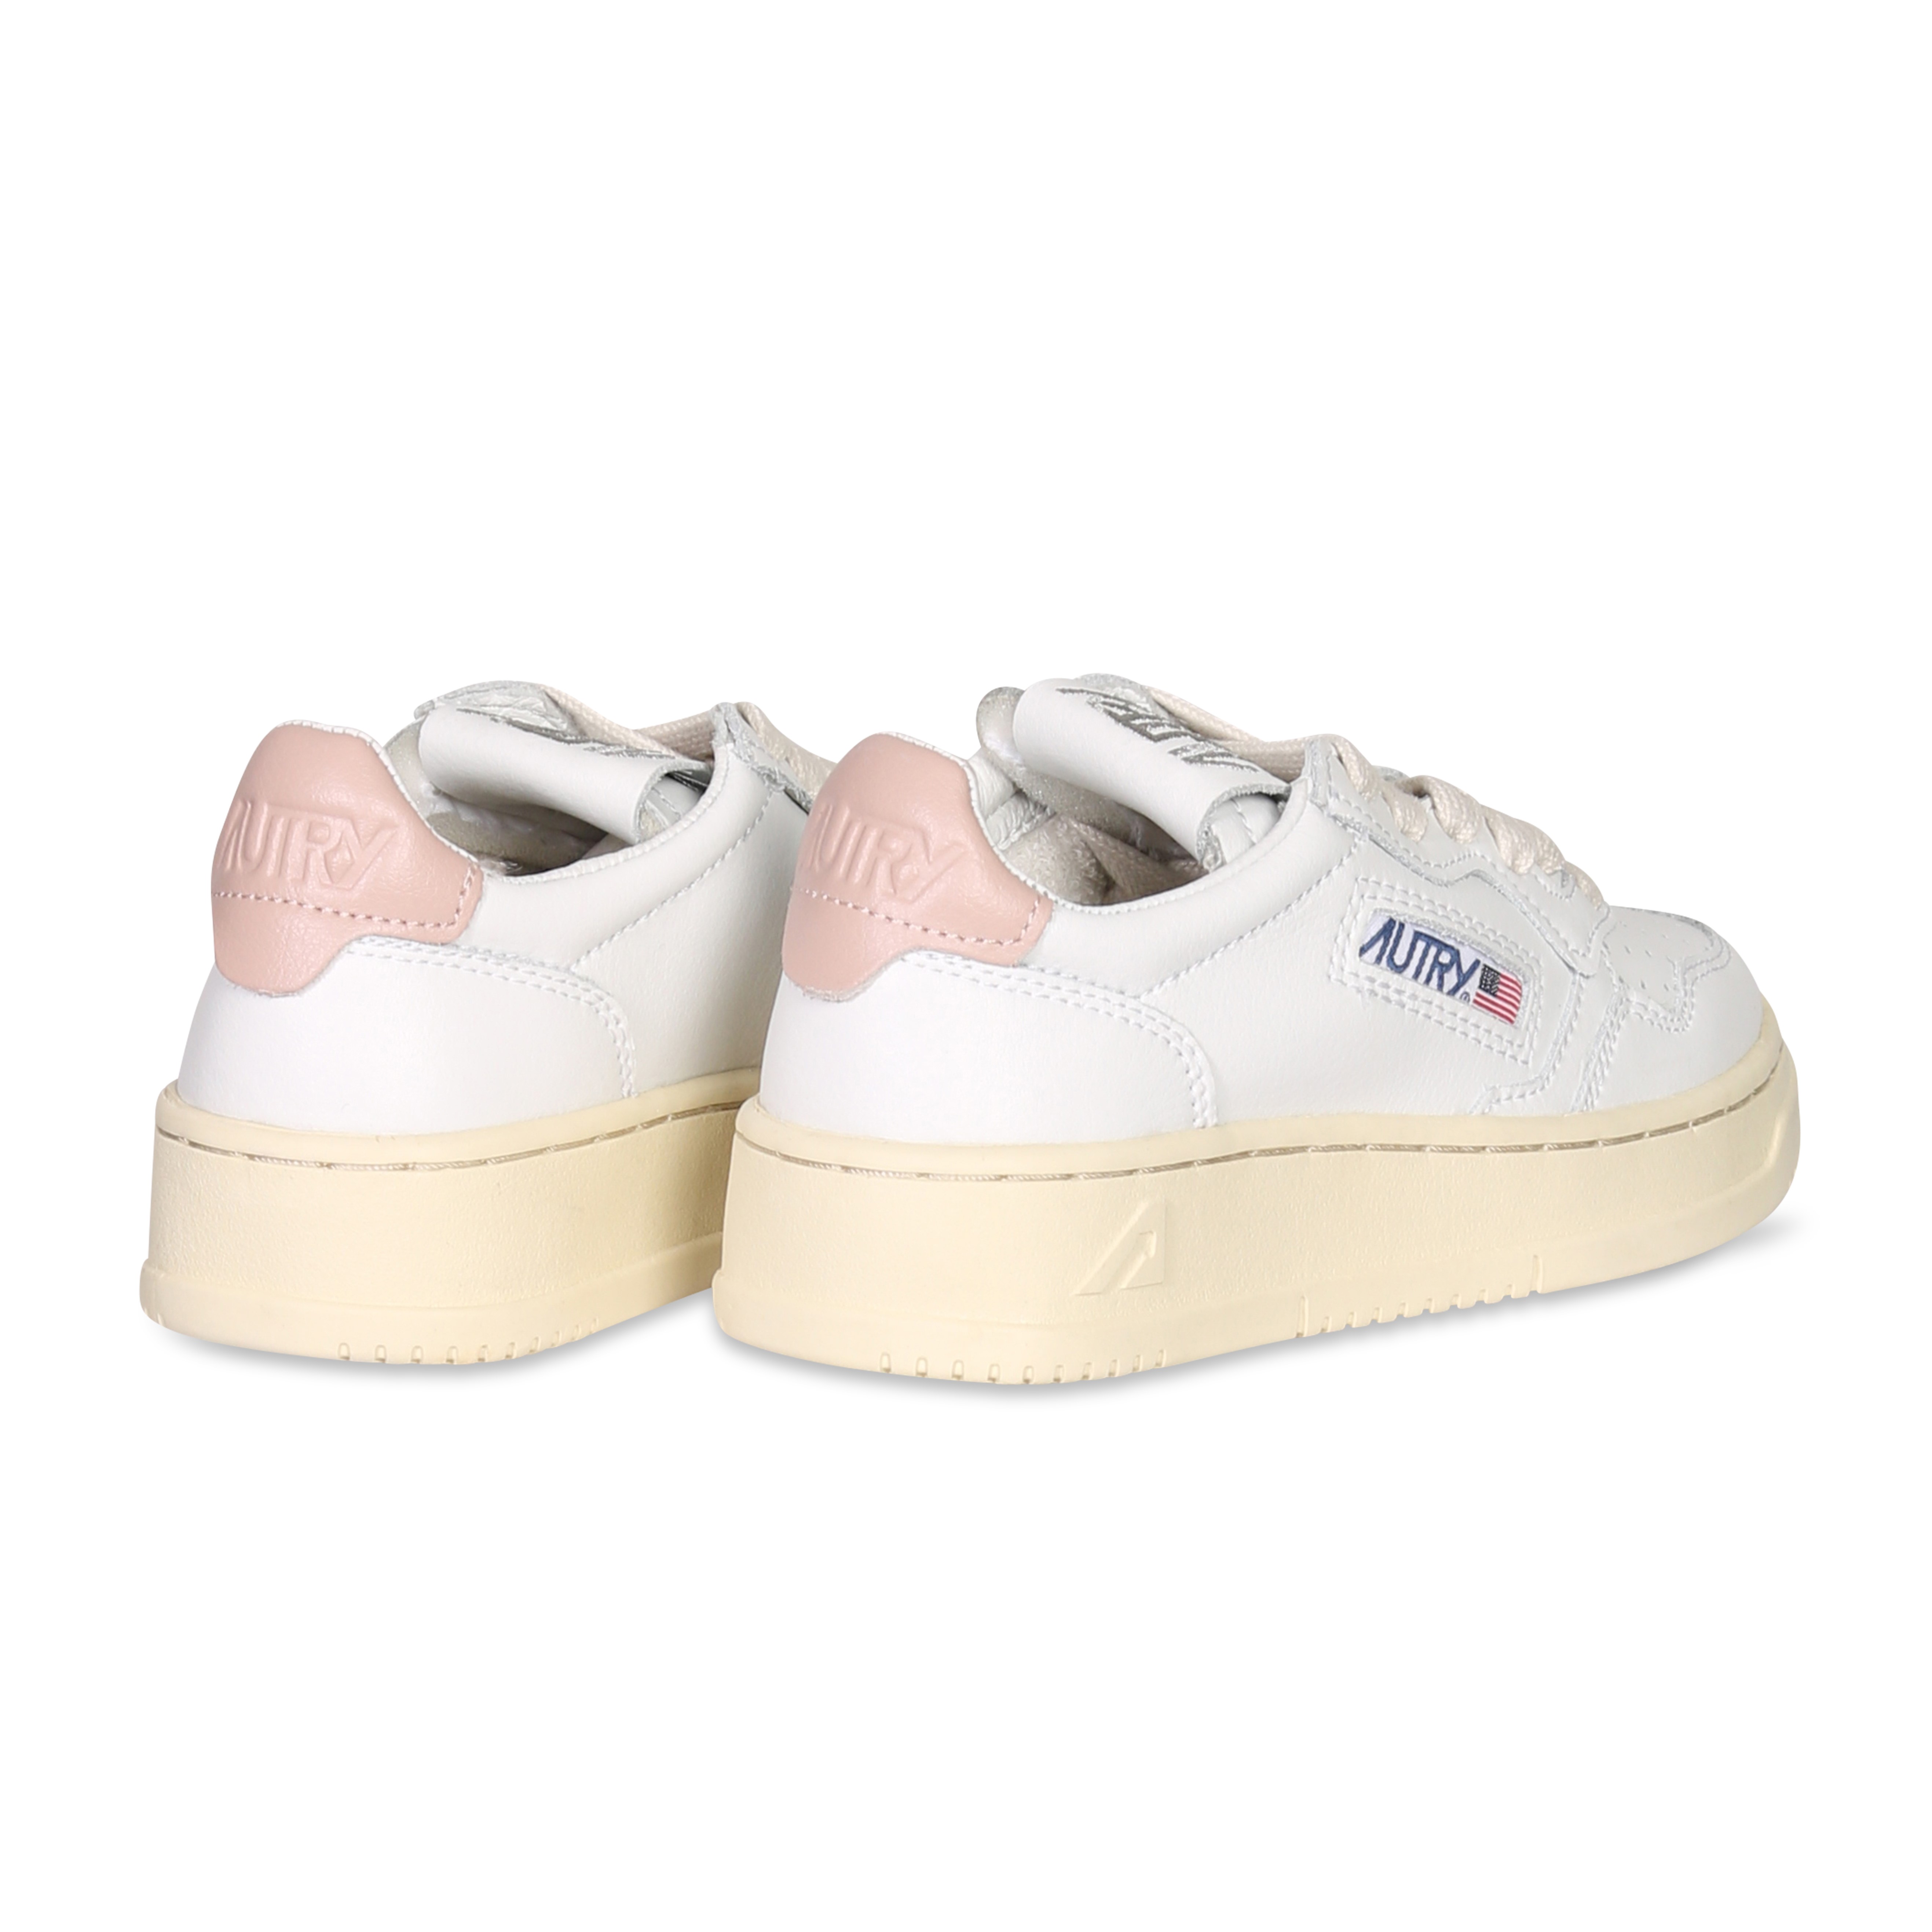 -Kids- Autry Action Shoes Low Sneaker in White/Pink 28